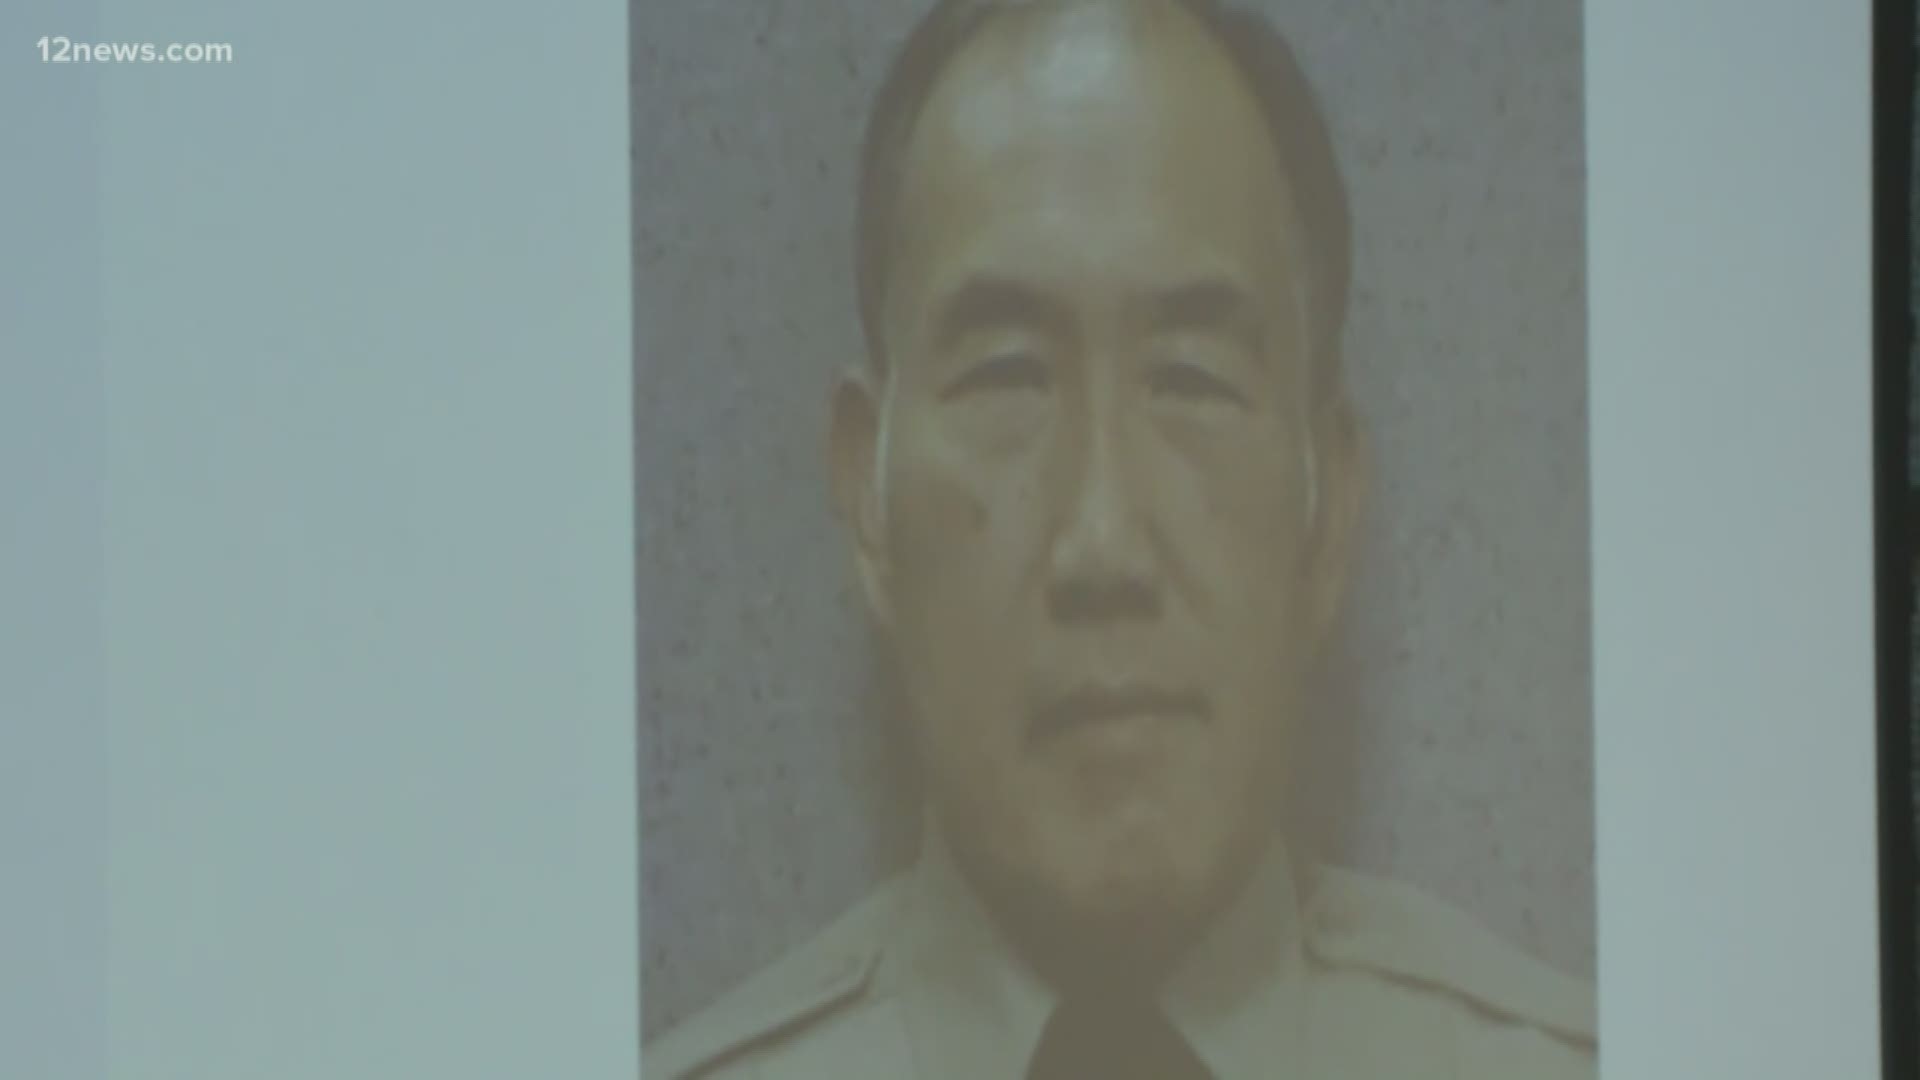 Officer Gene Lee is the first Maricopa County detention officer to lose their life in the line of duty. Lee was attacked by inmate Daniel Davitt Tuesday morning.